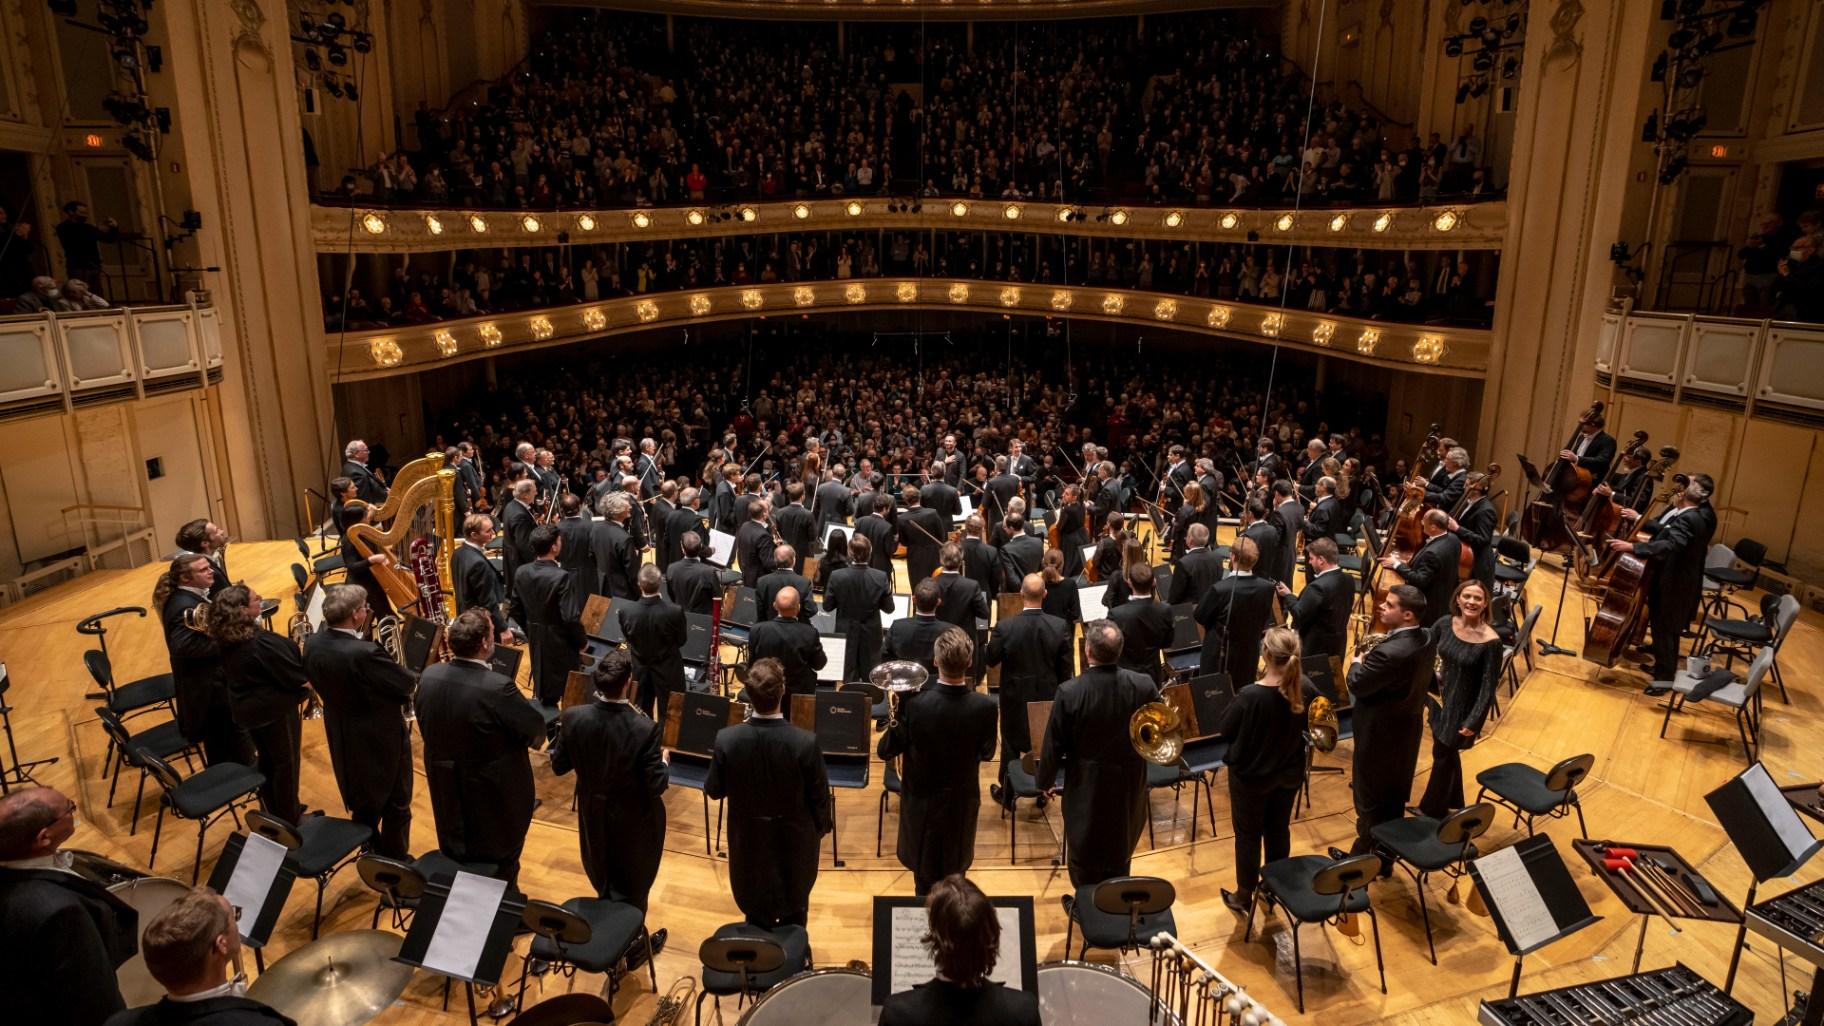 The Berlin Philharmoniker at Chicago’s Orchestra Hall performed Mahler’s “Symphony No. 7” on Nov. 16, 2022. (Credit: Todd Rosenberg Photography)